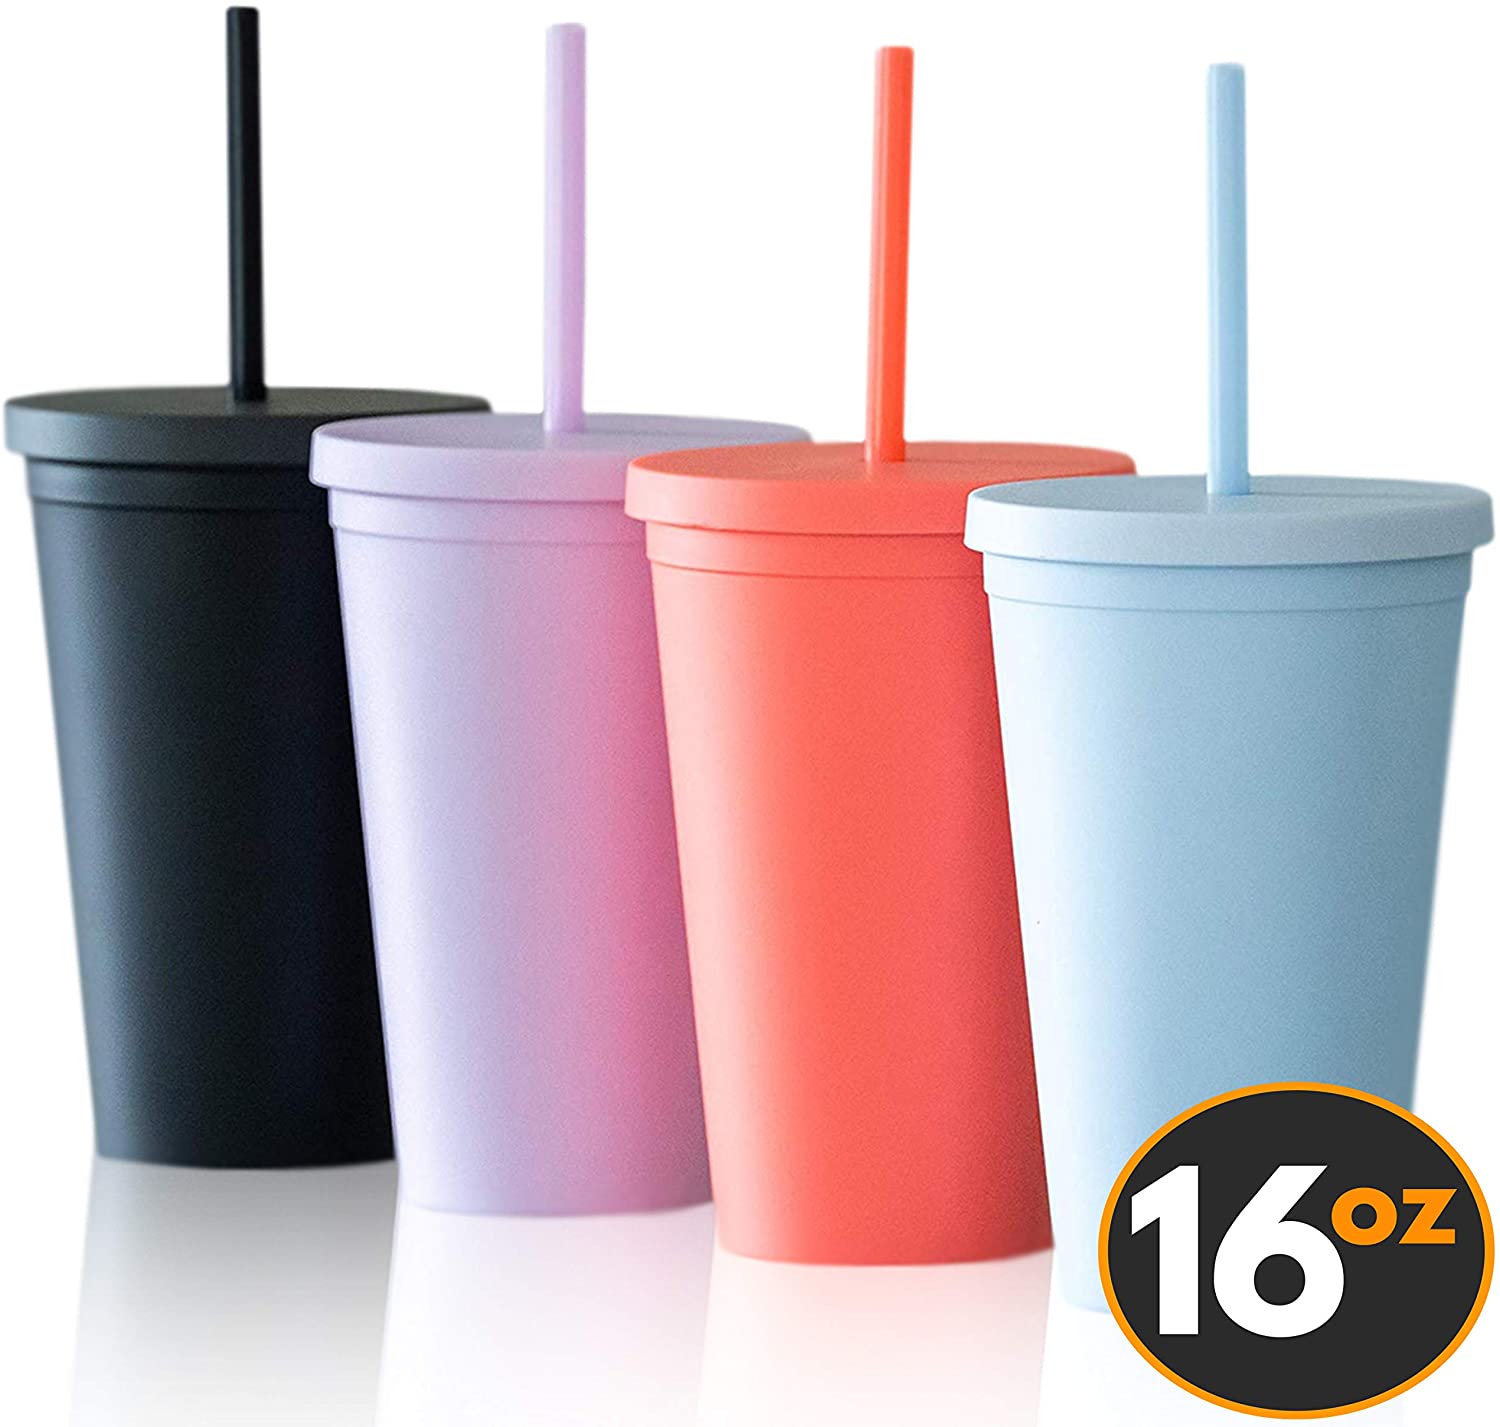 STRATA CUPS Classic Multicolor Tumblers with Lids and Straws (8 pack) -  22oz Matte Pastel Colored Ac…See more STRATA CUPS Classic Multicolor  Tumblers